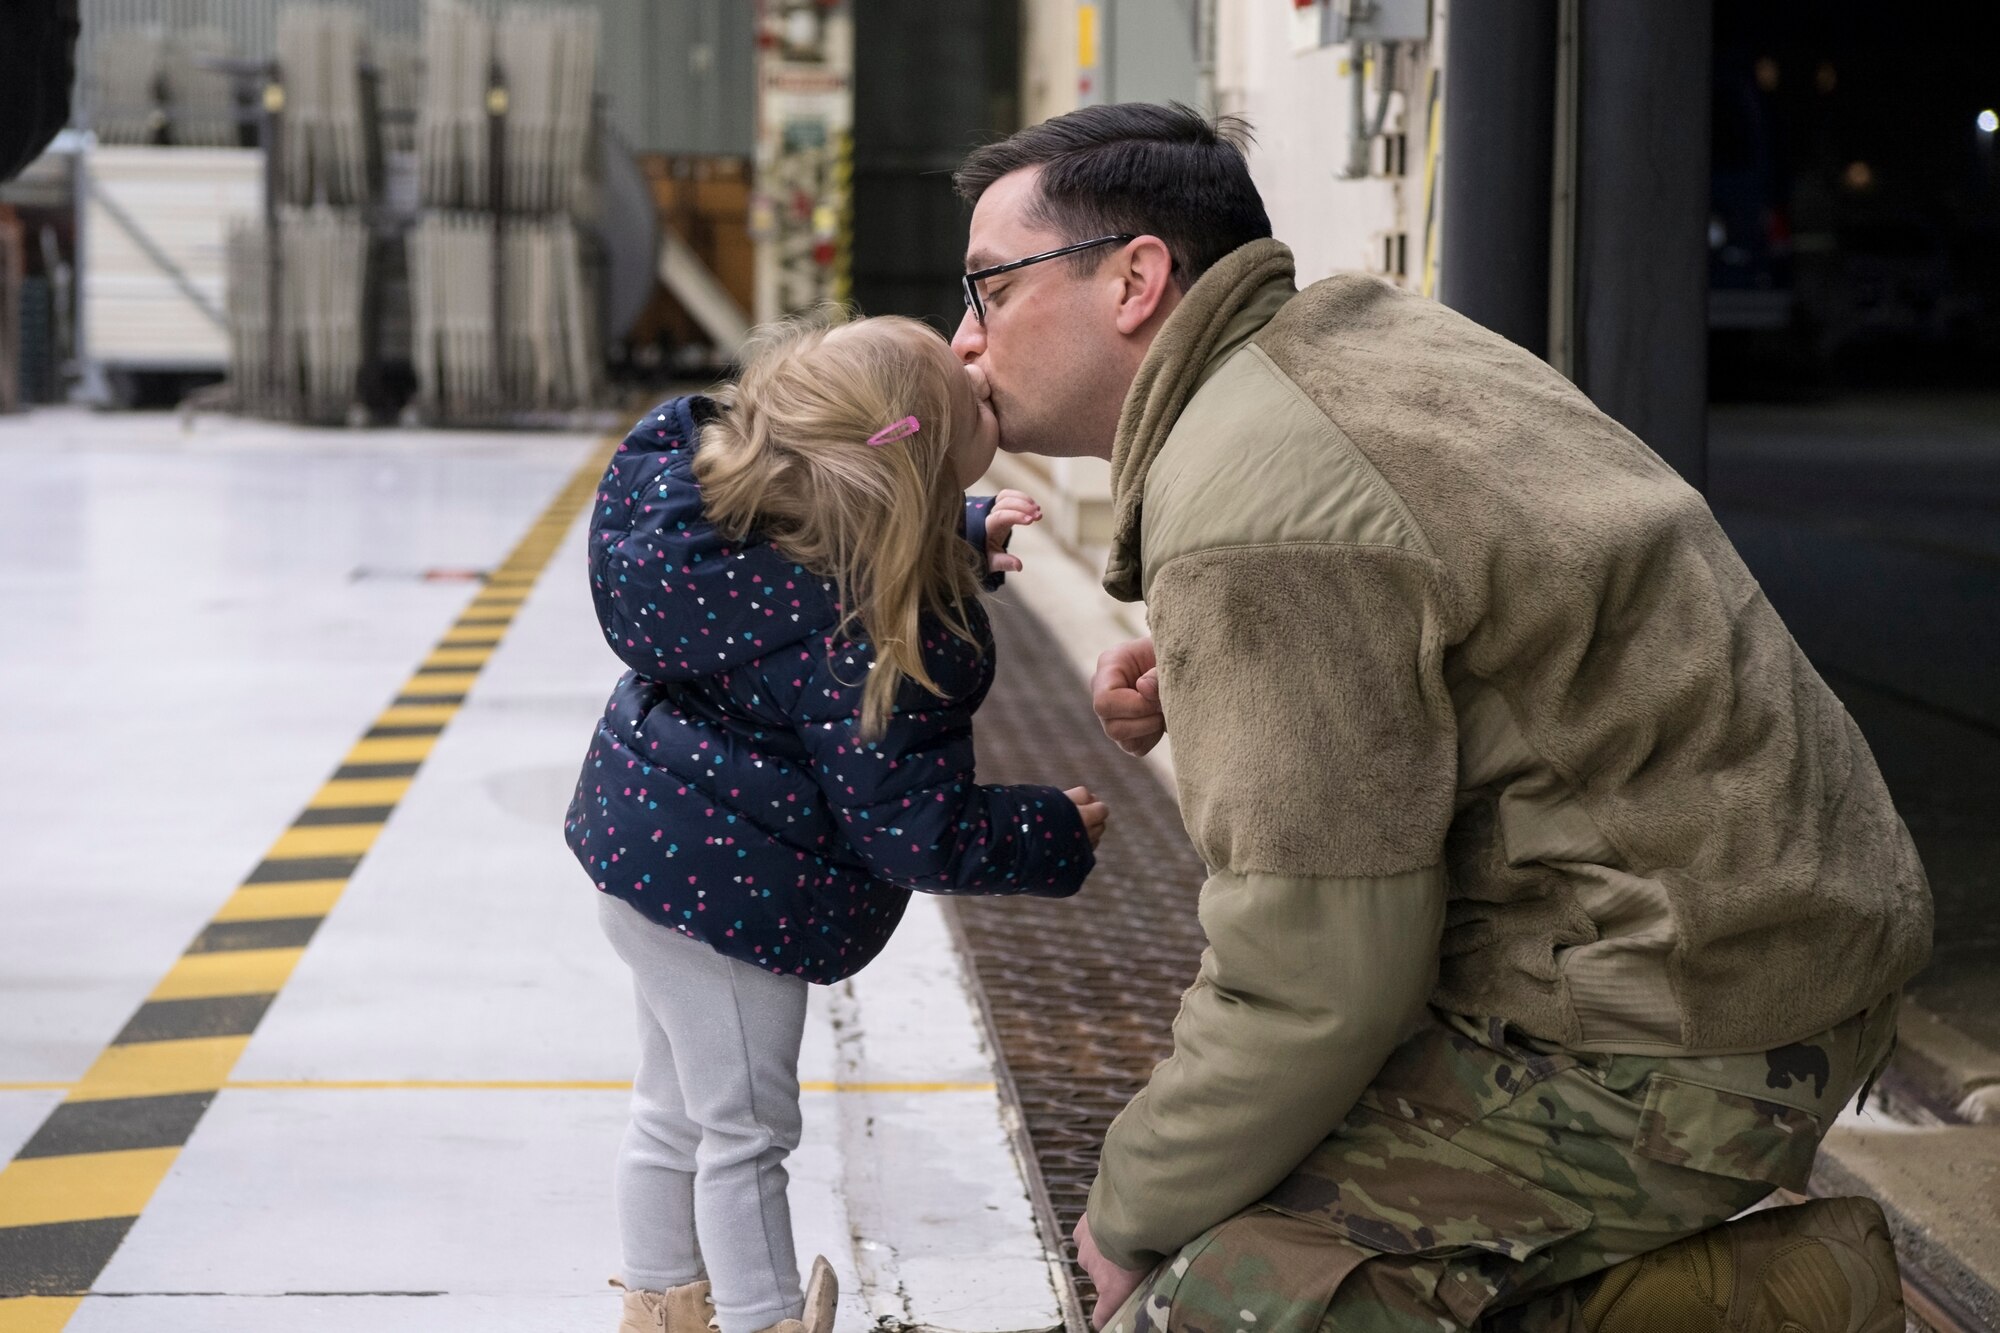 Staff Sgt. William Ellison, 434th Operations Support Squadron radio communication system specialist, embraces his daughter Gwendolyn, 2, after arriving at Grissom Air Reserve Base, Ind. Jan. 8, 2019. Ellison was one of 18 Airmen and three KC-135s who returned home following a deployment to Southwest Asia. (U.S. Air Force photo / Master Sgt. Ben Mota)